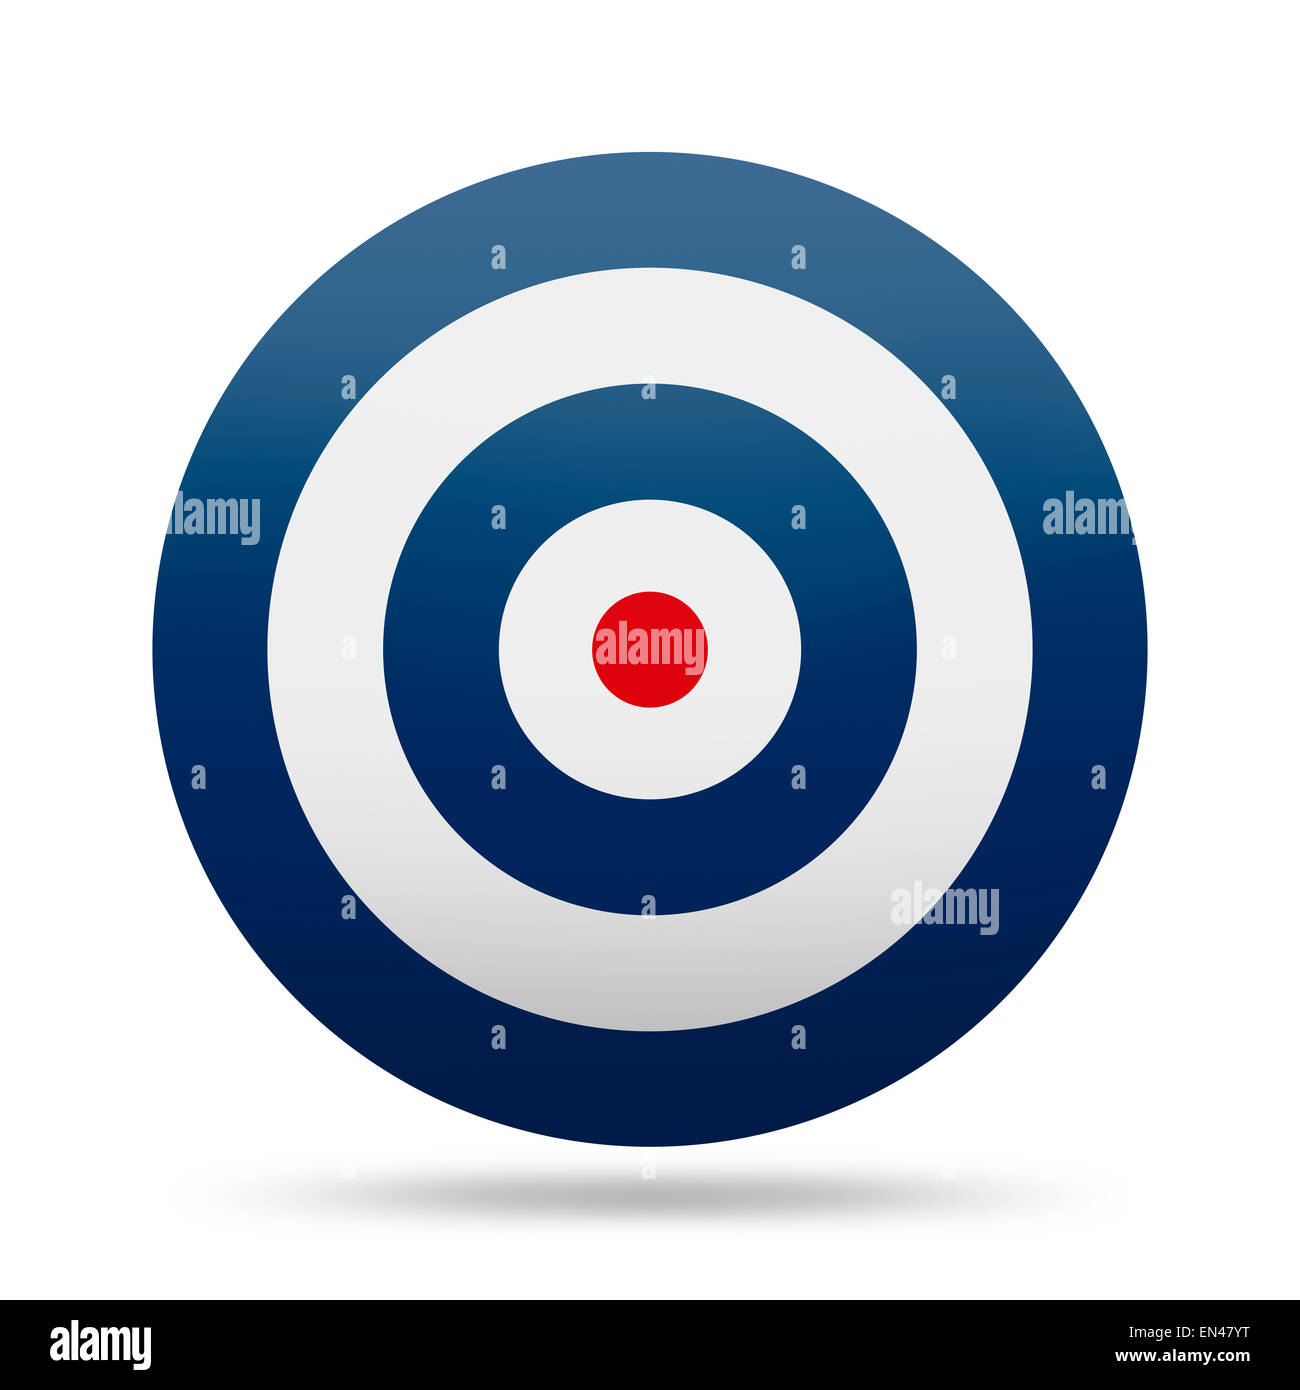 Round Target with Blue Rings and Red Center Isolated on White Background. Stock Photo